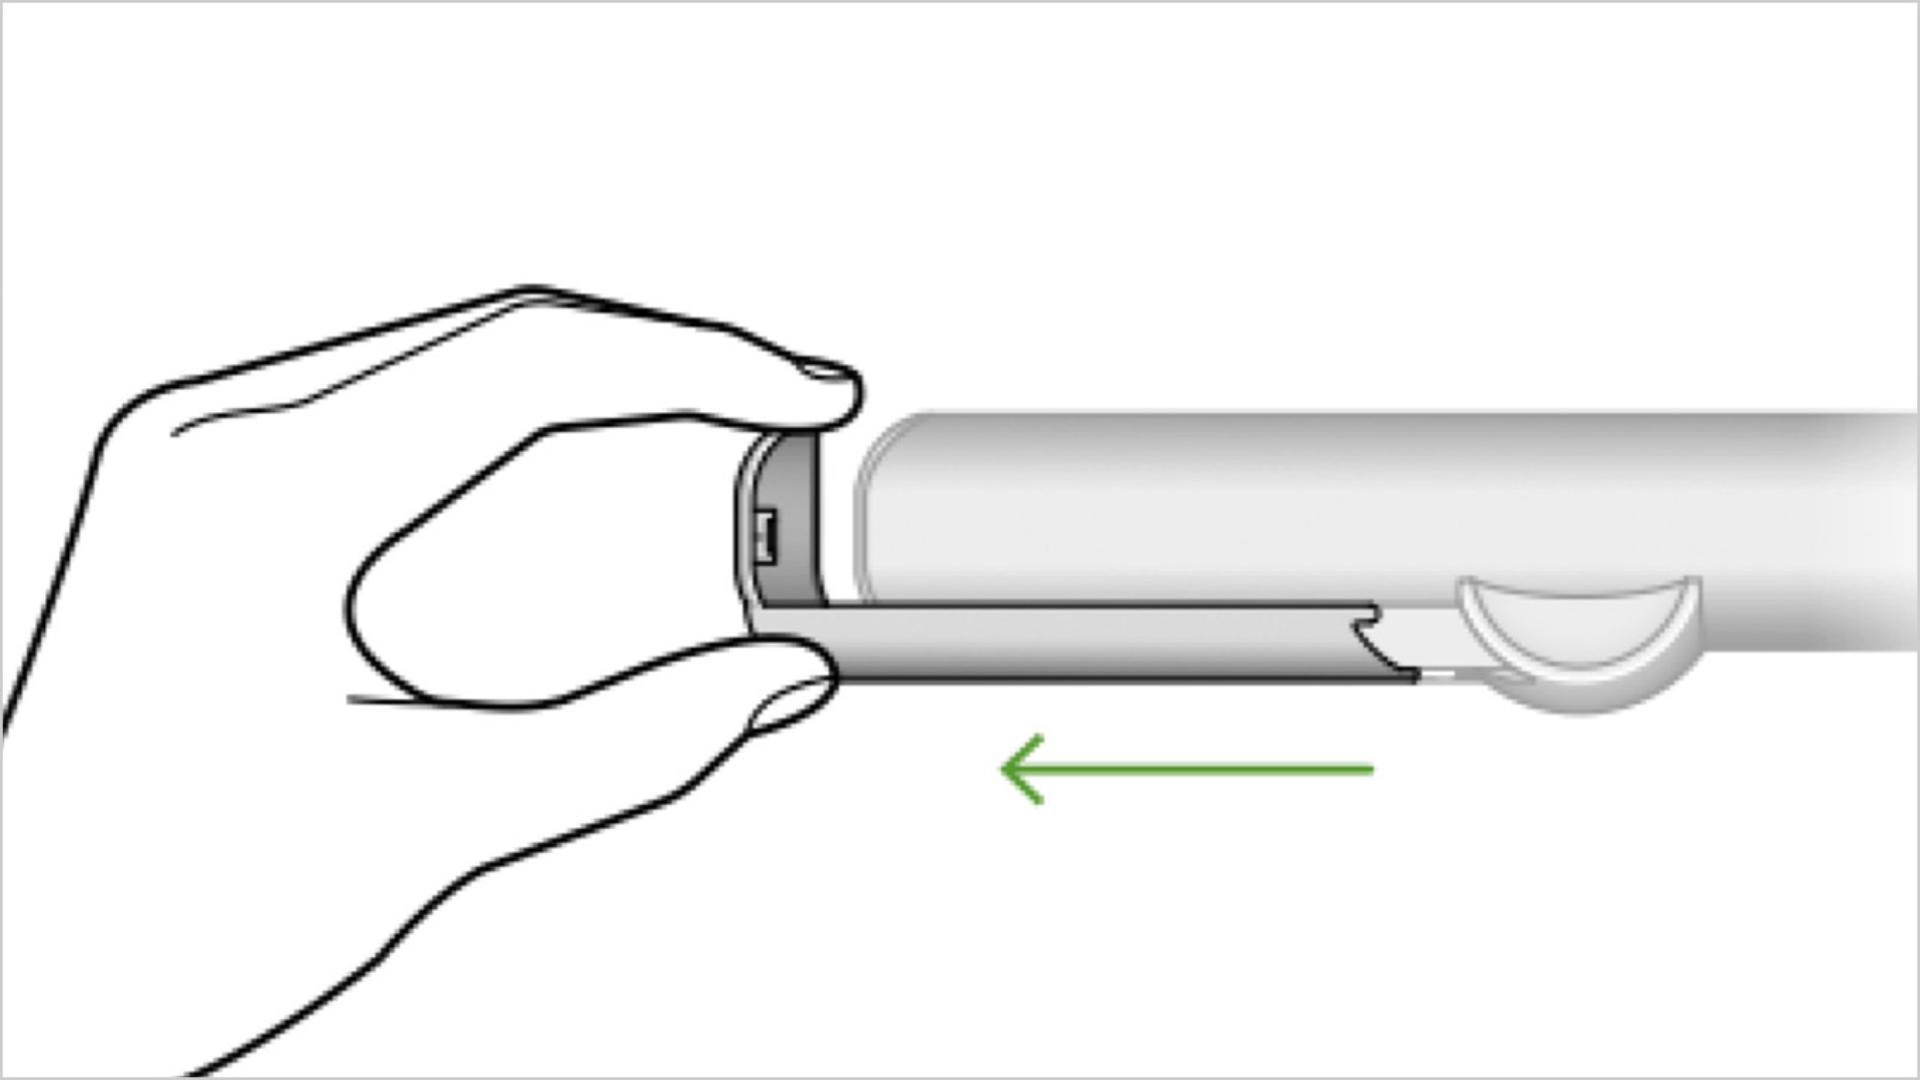 Illustration of diffusers being removed from the Dyson Airstrait machine.